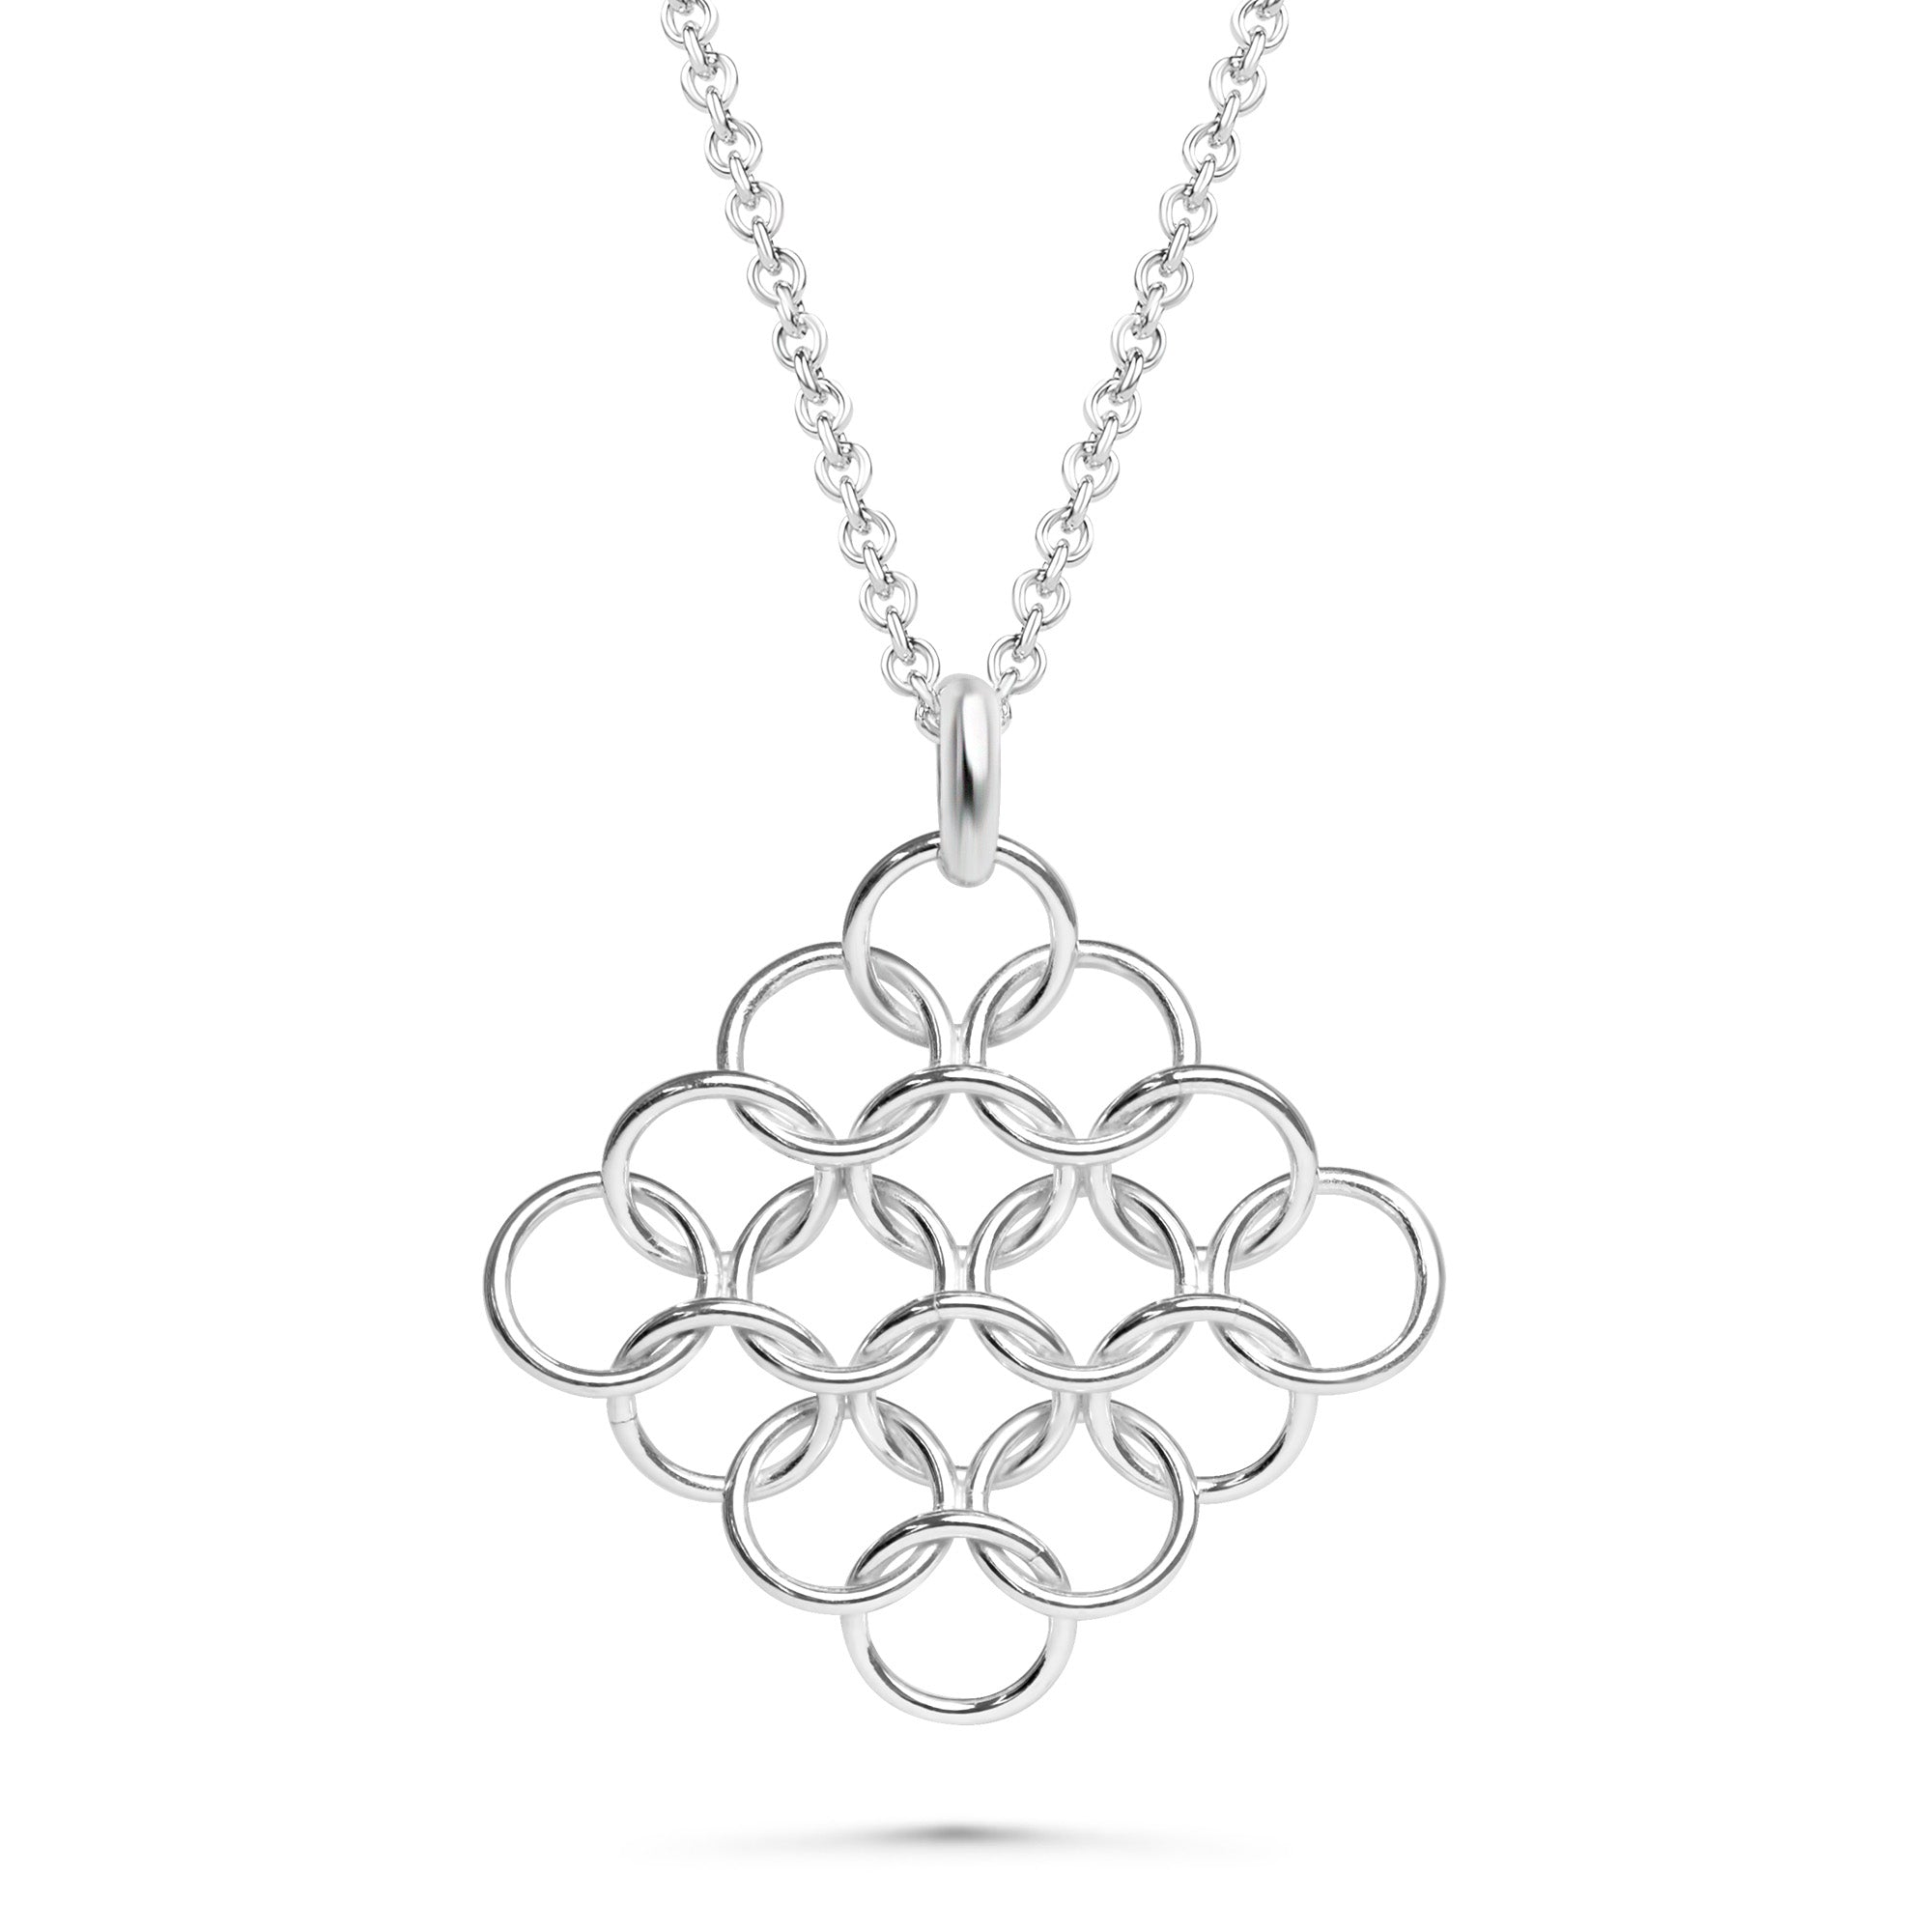 European Chainmaille Pendant Necklace